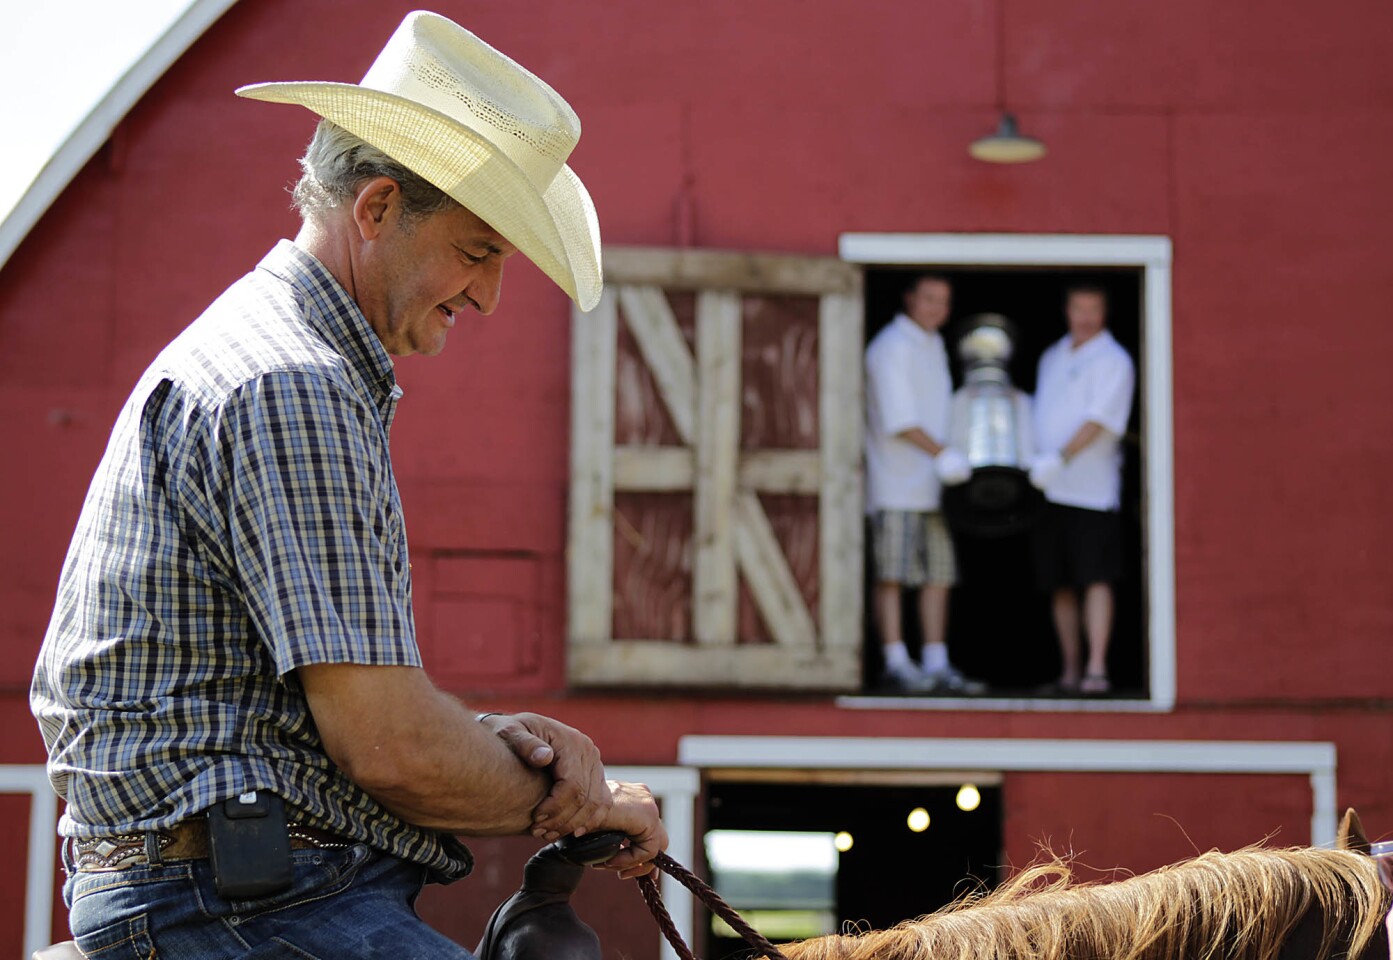 In Canada, you know that hockey is never going to be far away. Even down on the farm. In this image from 2012, the background shows Stanley Cup keepers Mike Bolt, right, and Howard Borrow in a barn doorway with hockey's greatest prize. In the foreground, Los Angeles Kings coach Darryl Sutter rides by on his horse, Red. Sutter's farm is near the small town of Viking, Alberta.